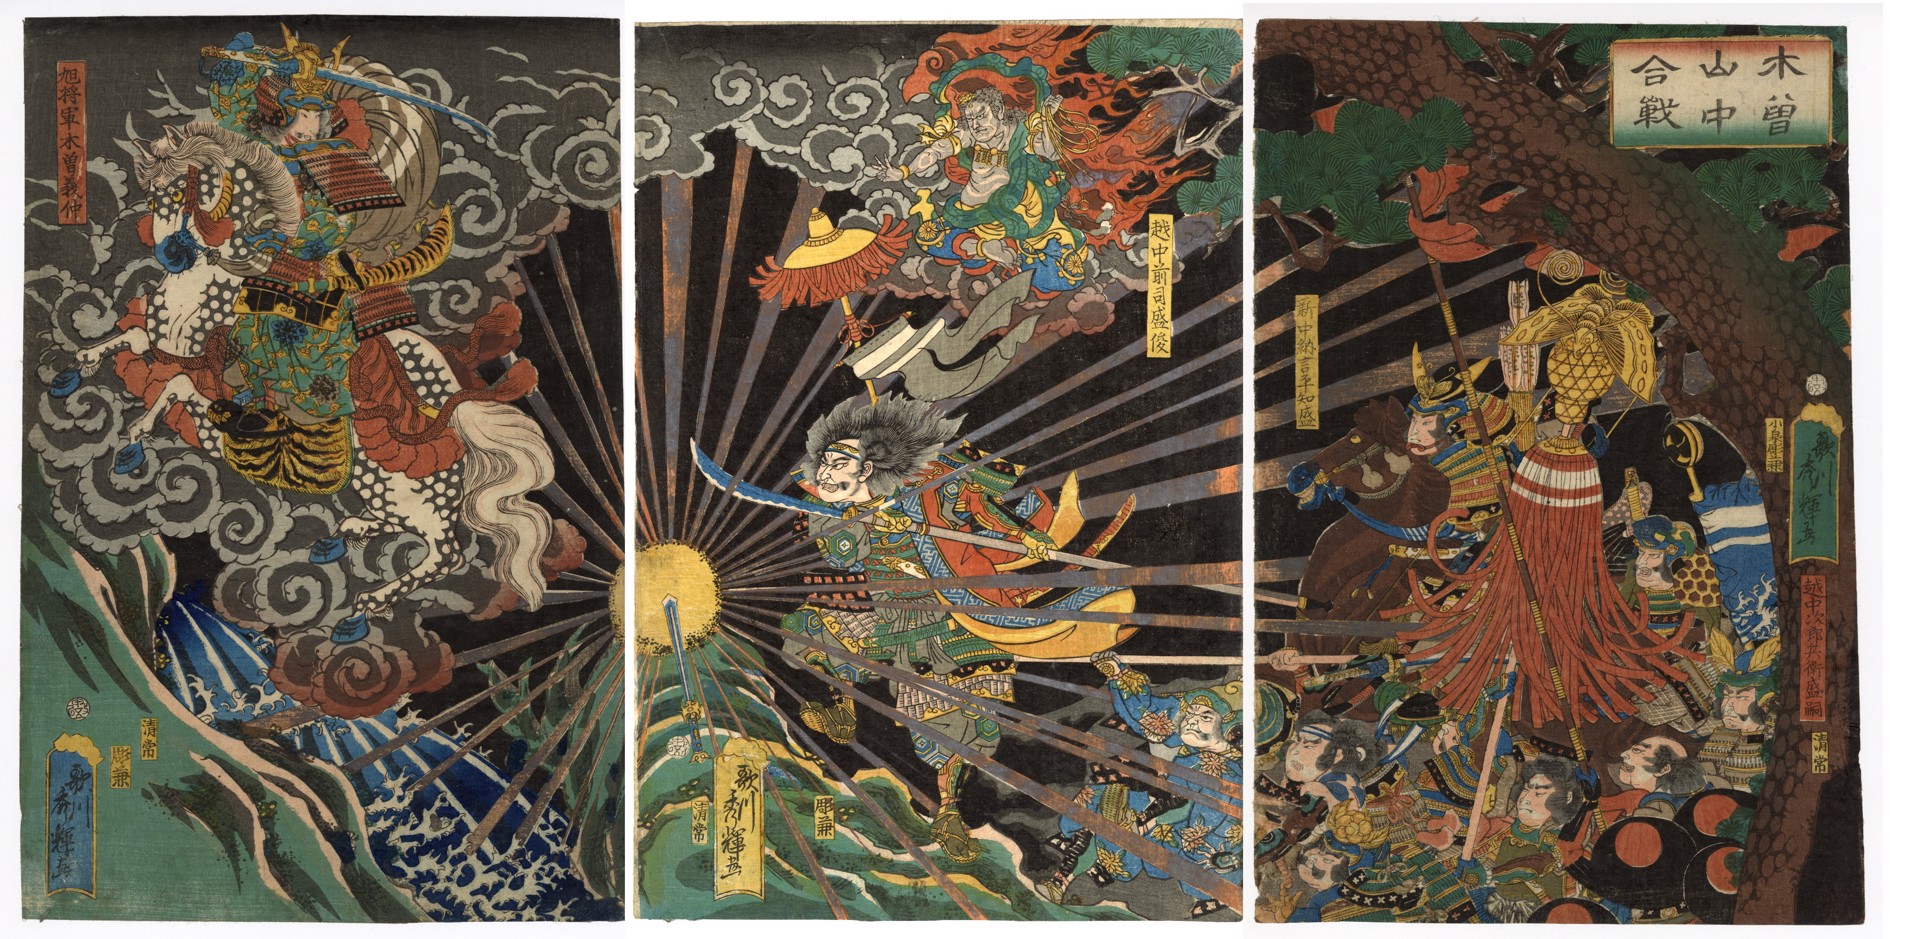 A Battle in the Kiso Mountains by Hideteru (act. 1850 - 60)